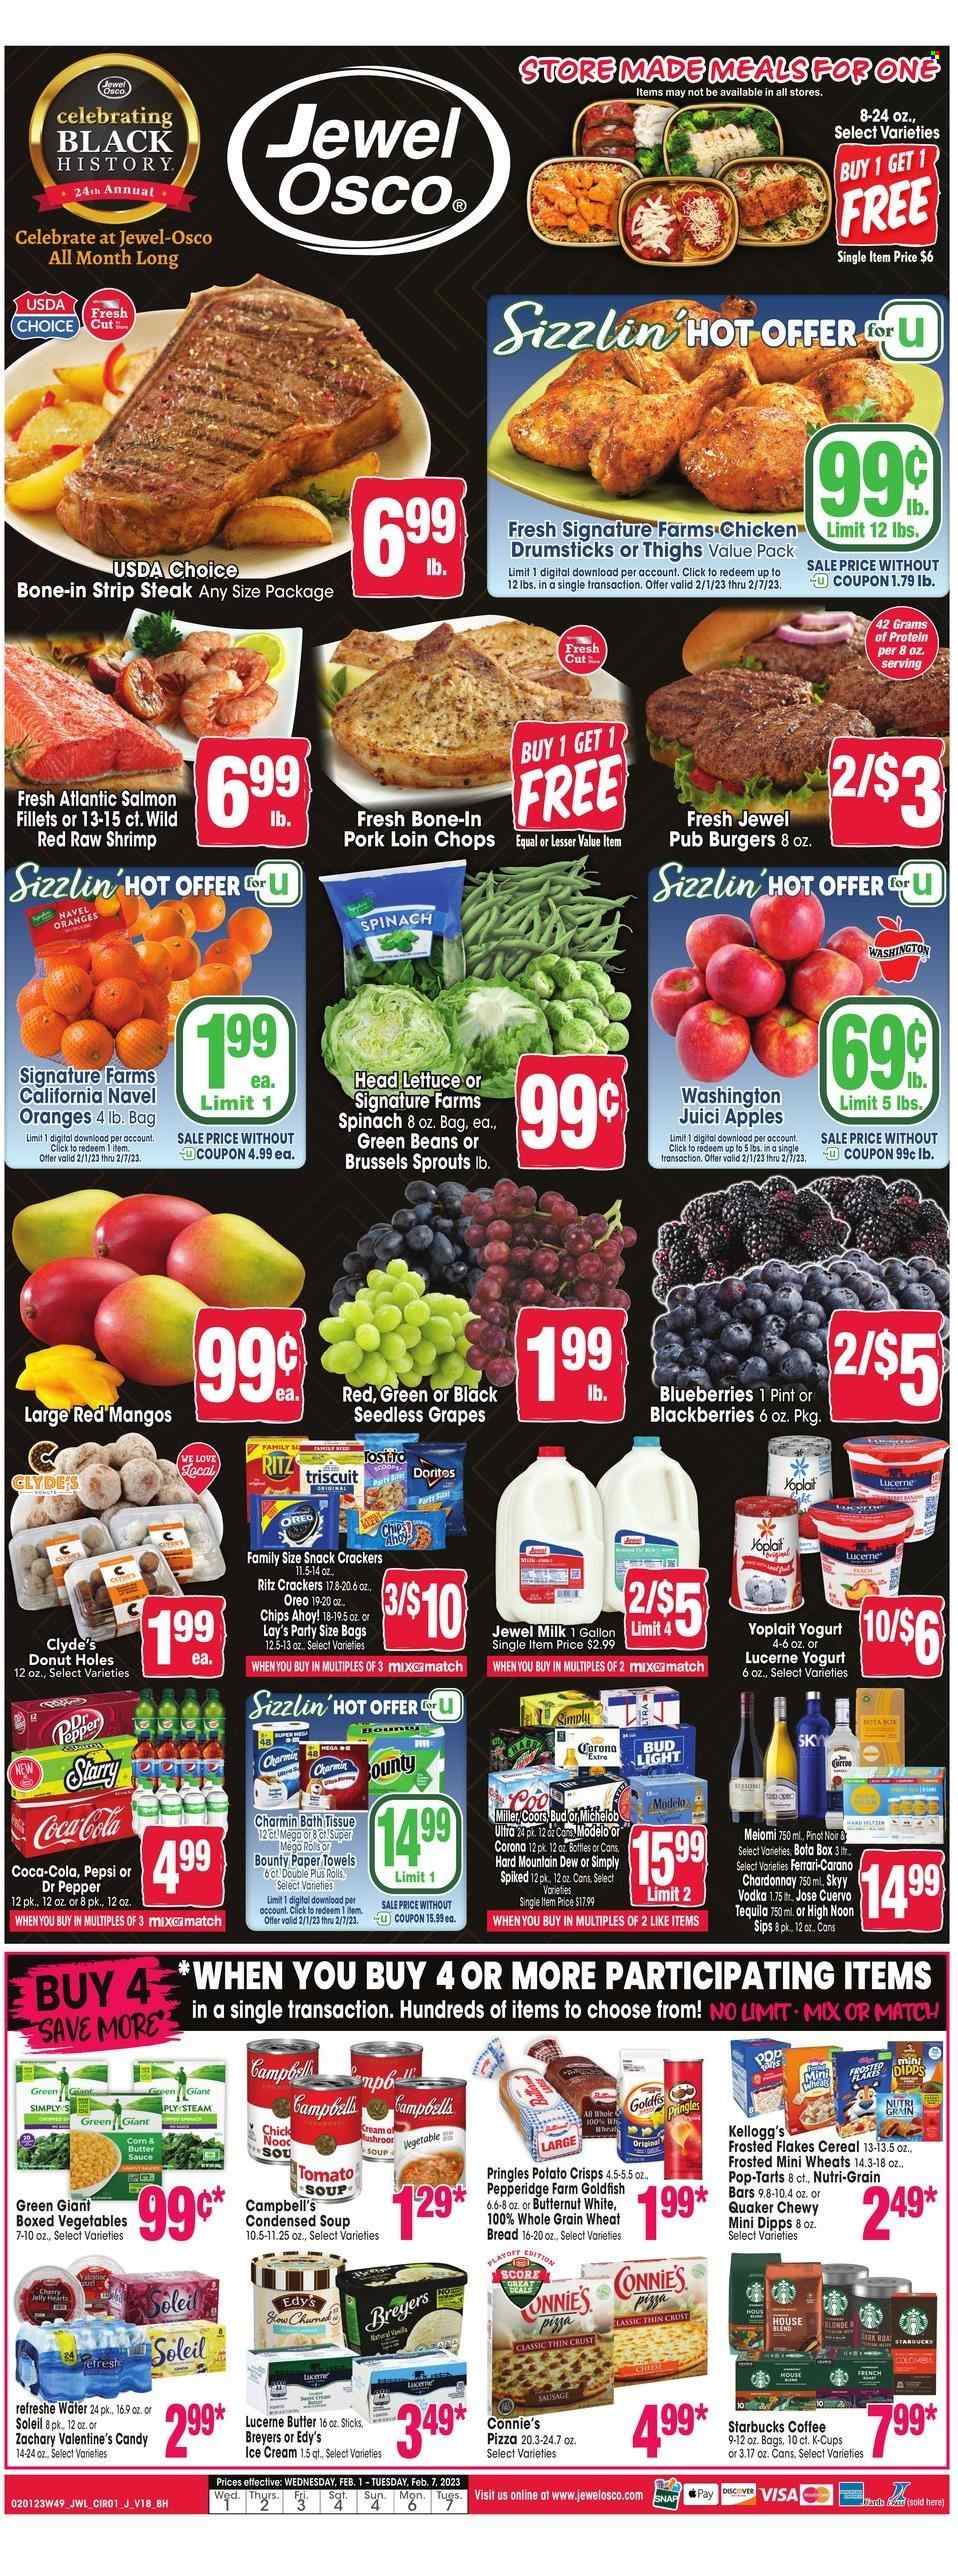 thumbnail - Jewel Osco Flyer - 02/01/2023 - 02/07/2023 - Sales products - wheat bread, donut holes, green beans, lettuce, brussel sprouts, apples, blackberries, blueberries, grapes, mango, seedless grapes, oranges, salmon, salmon fillet, shrimps, Campbell's, tomato soup, pizza, condensed soup, soup, hamburger, sauce, Quaker, instant soup, Oreo, yoghurt, Yoplait, milk, ice cream, snack, Bounty, jelly, crackers, Kellogg's, Pop-Tarts, Chips Ahoy!, RITZ, Doritos, potato crisps, Pringles, chips, Lay’s, Goldfish, cereals, Frosted Flakes, Nutri-Grain, Coca-Cola, Mountain Dew, Pepsi, Dr. Pepper, coffee, Starbucks, coffee capsules, K-Cups, white wine, Chardonnay, Pinot Noir, tequila, vodka, beer, Bud Light, Corona Extra, Miller, Modelo, chicken drumsticks, beef meat, steak, striploin steak, pork chops, pork loin, pork meat, bath tissue, kitchen towels, paper towels, Charmin, mixer, butternut squash, Coors, Michelob, navel oranges. Page 1.